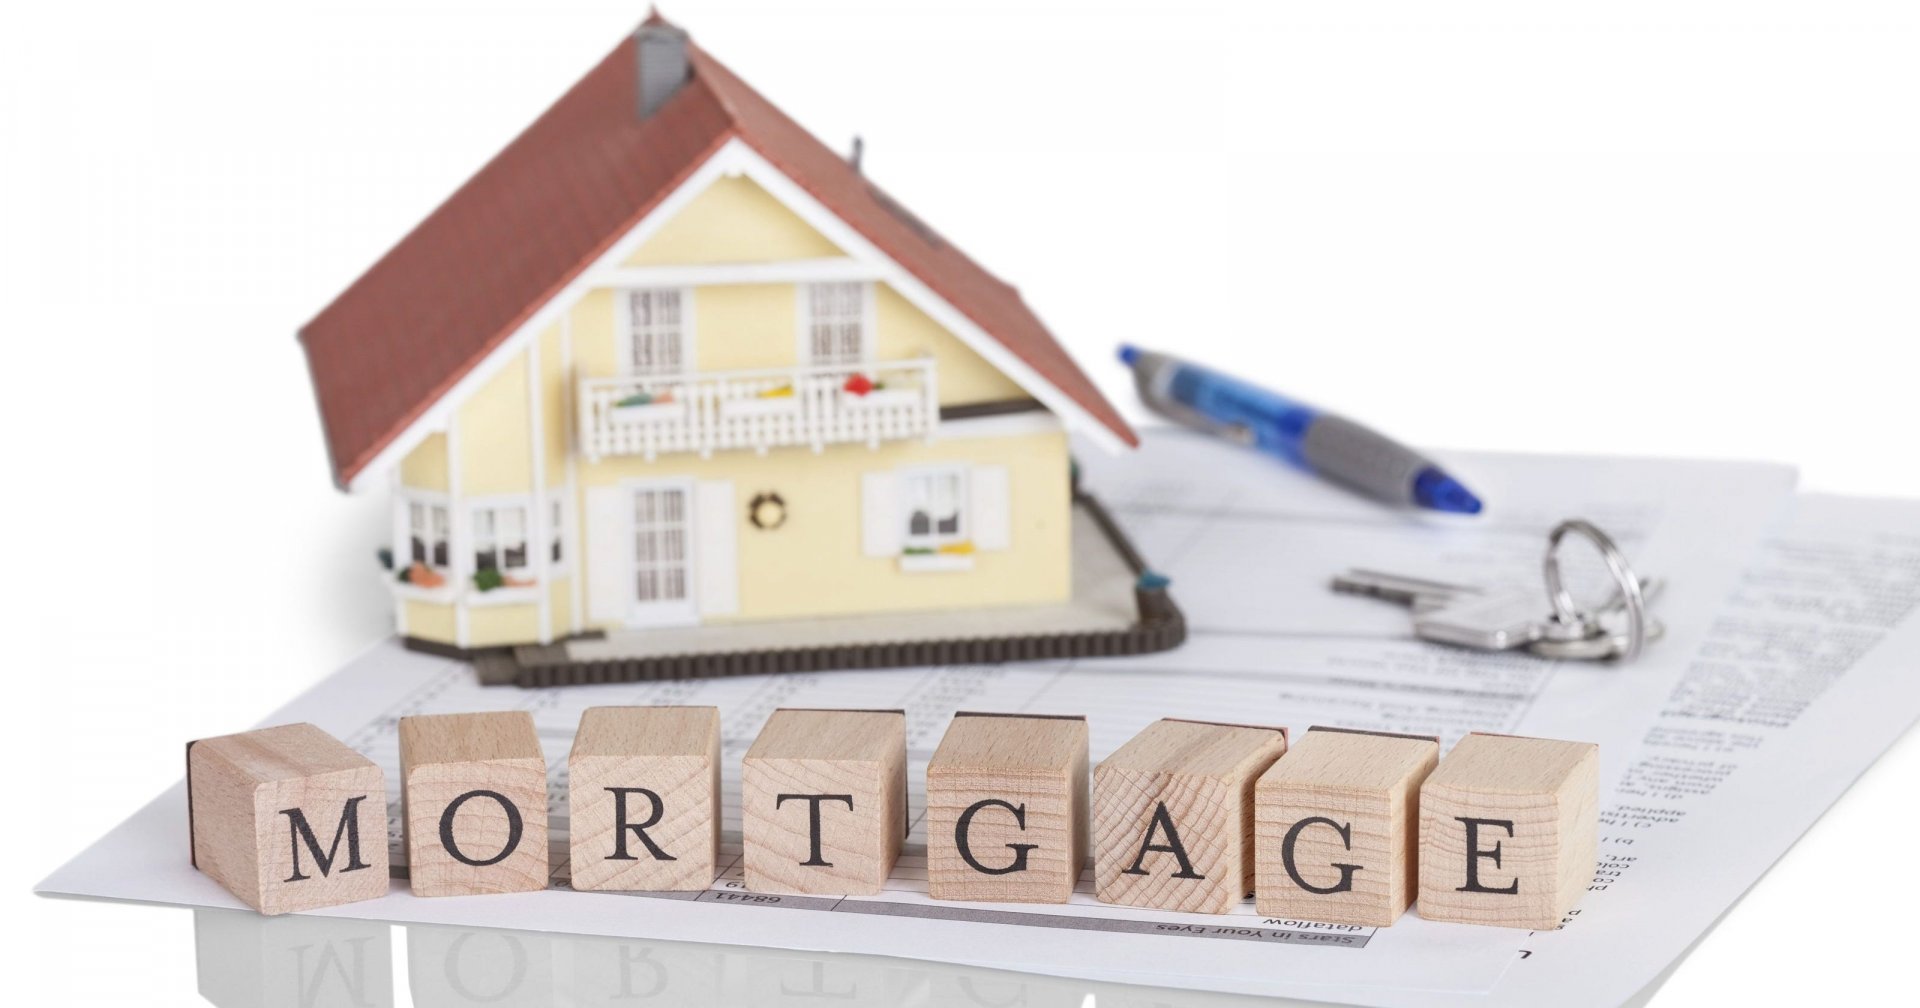 DO YOU NEED A MORTGAGE BROKER?